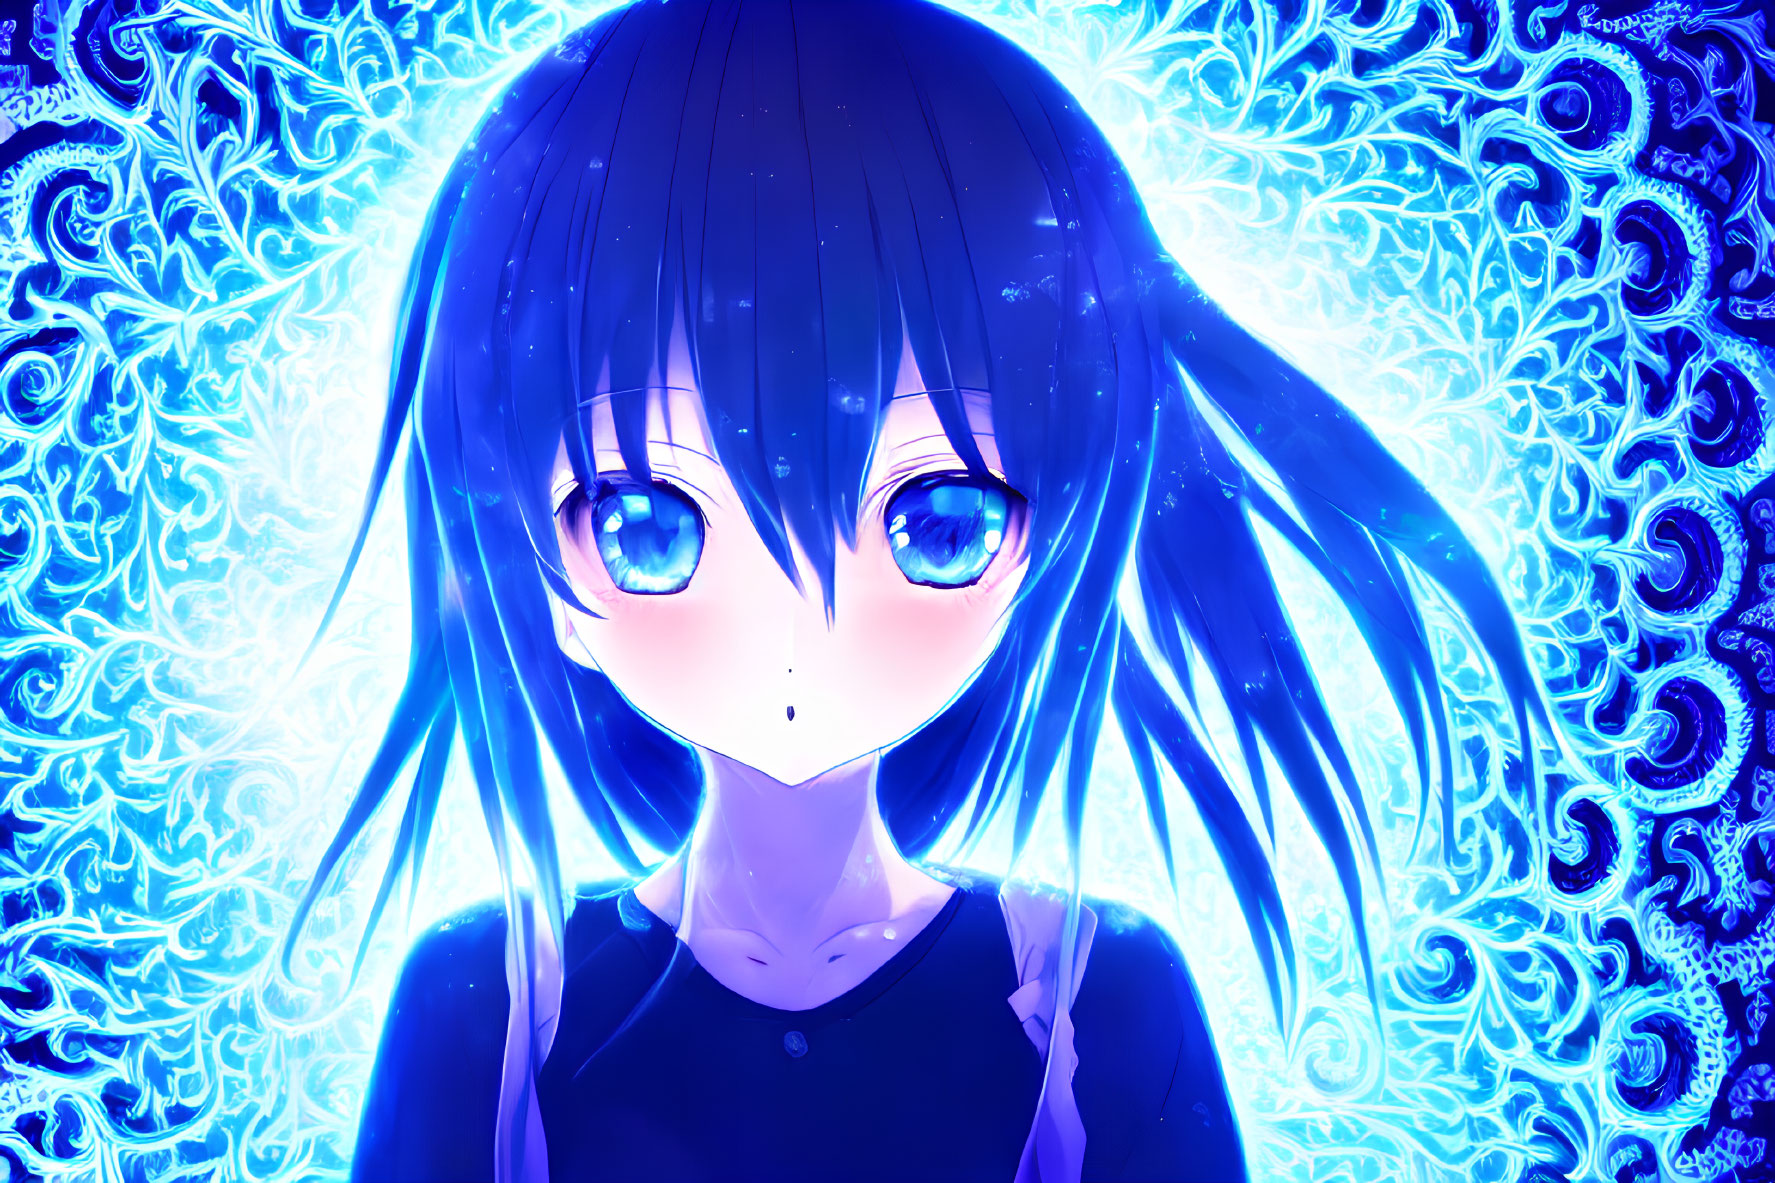 Anime-style girl with blue eyes and black hair on blue ornate background